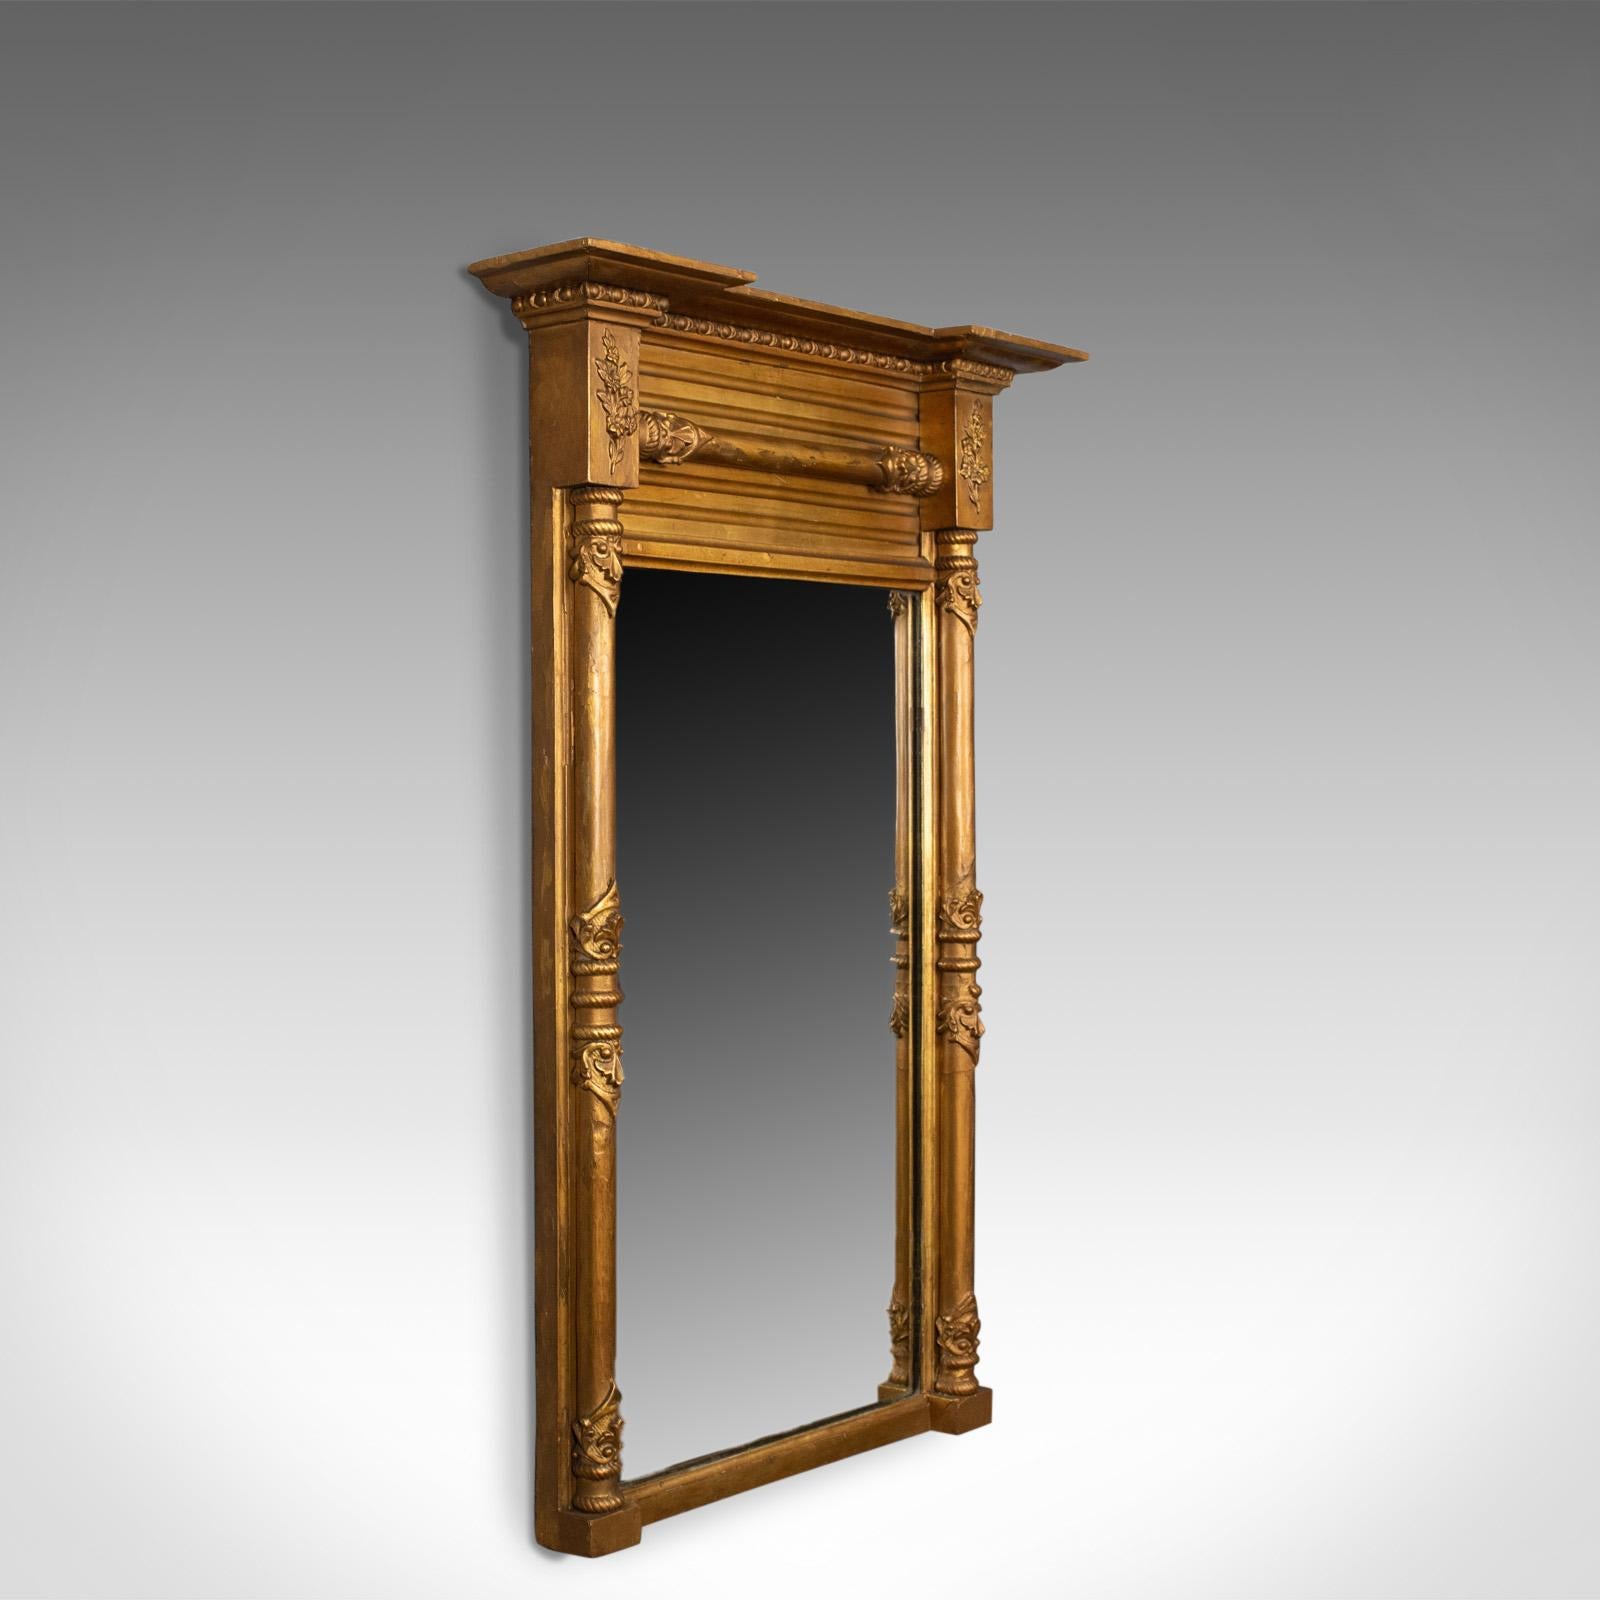 This is an antique pier mirror. A Regency, giltwood wall mirror dating to the early 19th century, circa 1820.

Attractive mellow golden tones in the giltwood frame
A refined mirror, mid-sized with a good finish and desirable aged patina
Superb